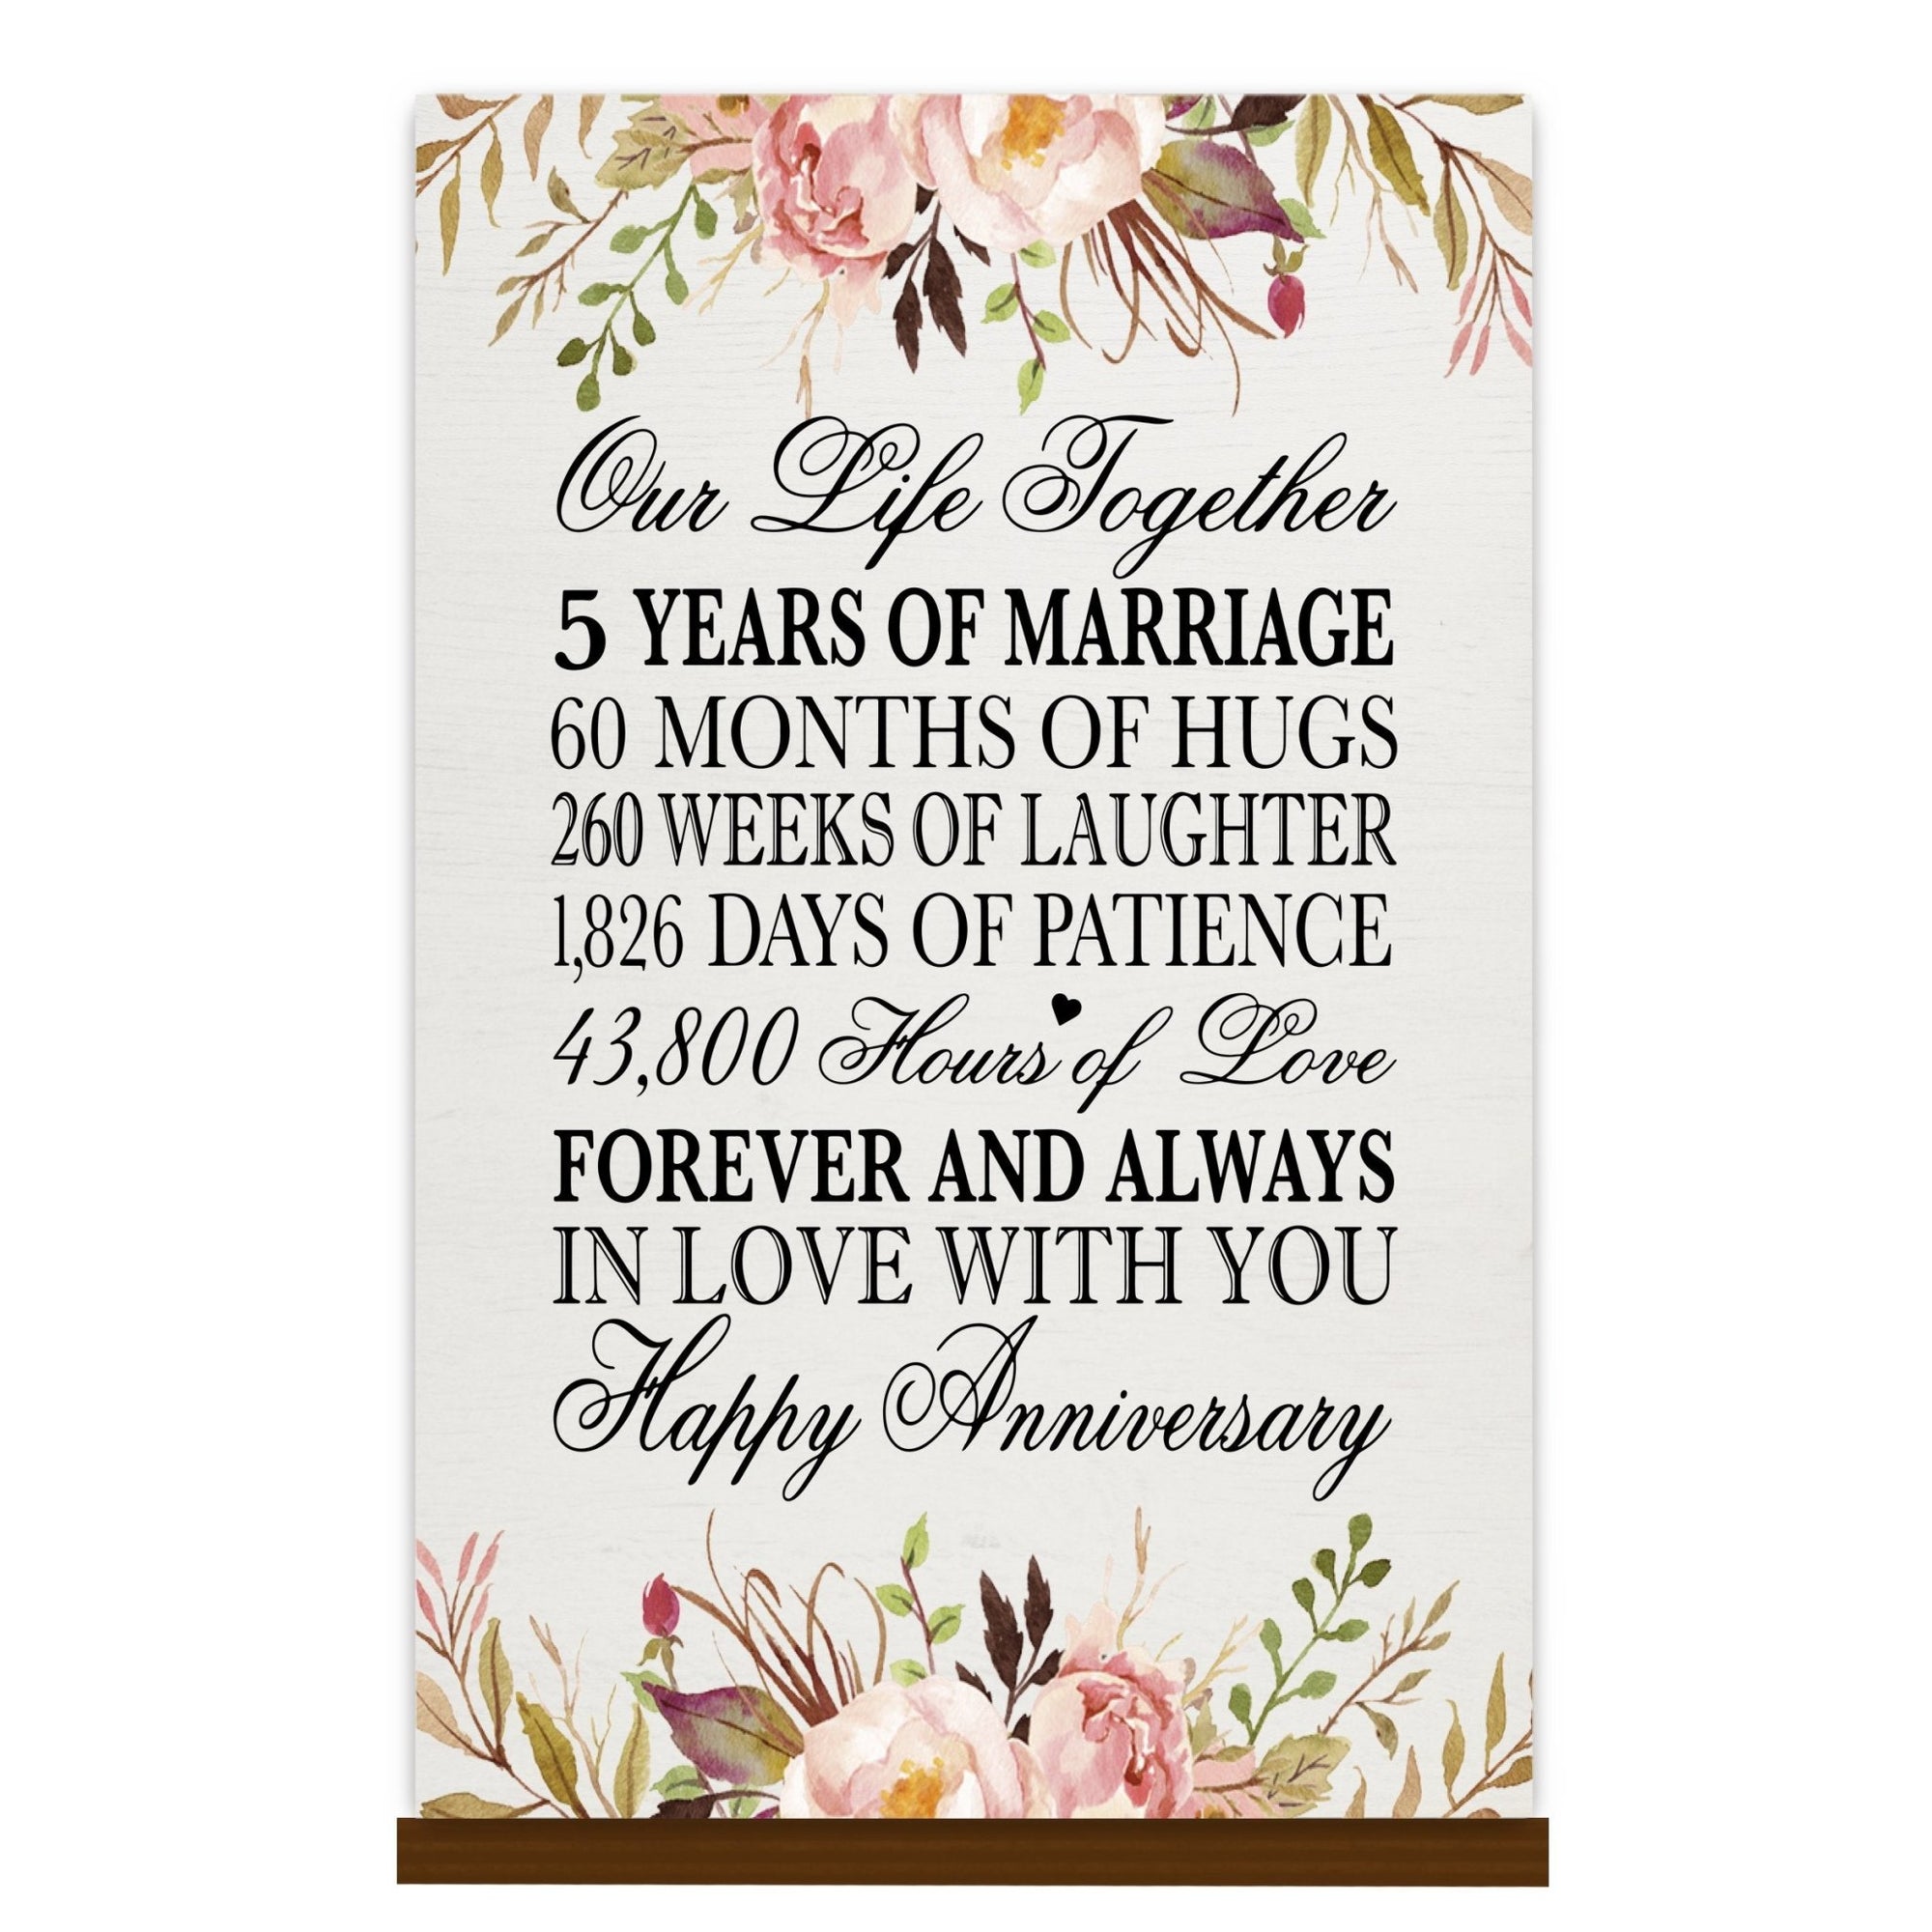 LifeSong Milestones 5th Anniversary Wall Plaque for Couples